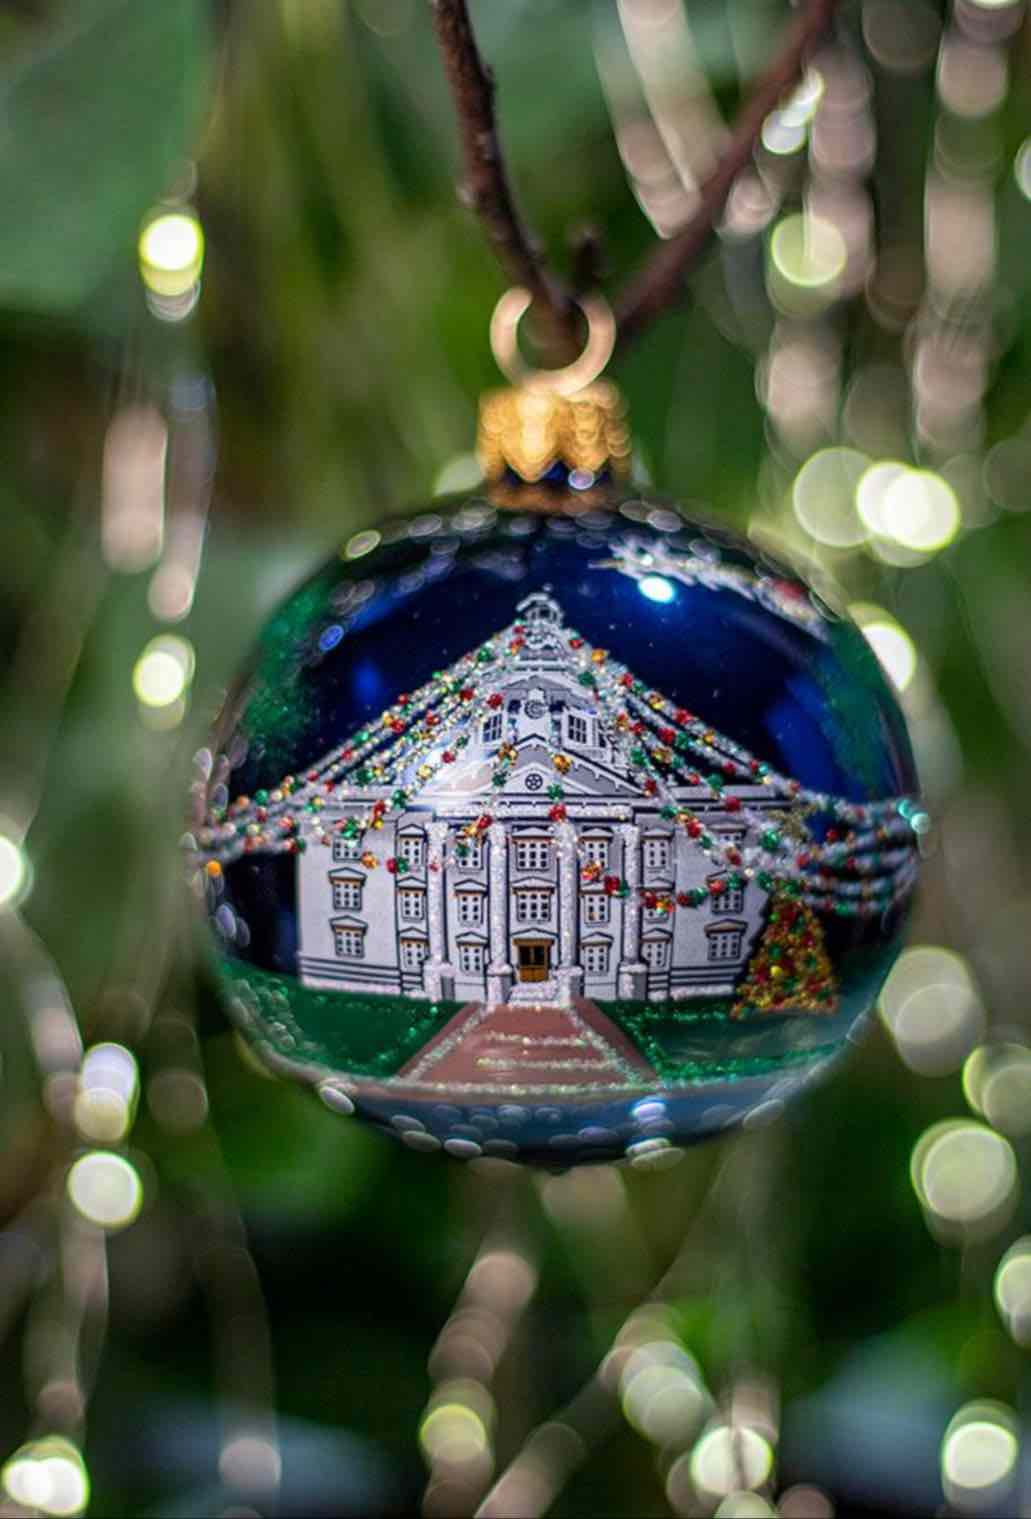 Moultrie GA Courthouse Christmas Scene Ornament